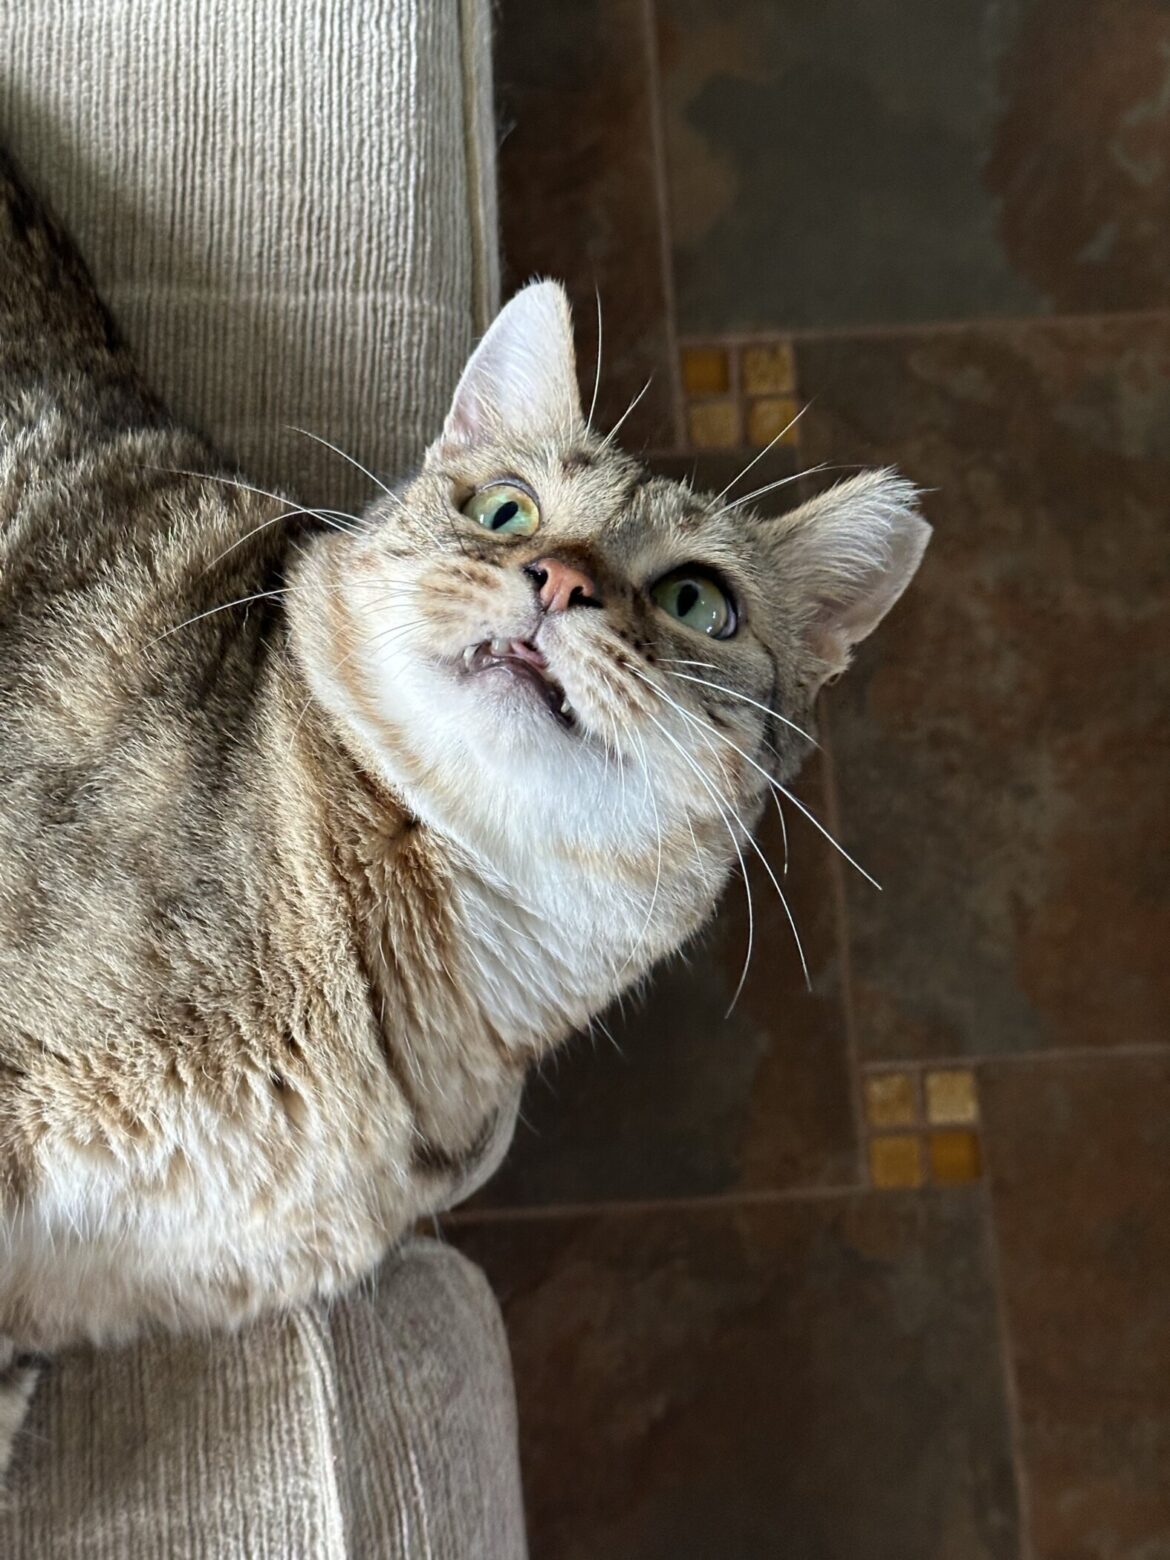 Mango the Cat: From Illness to a Happy Life